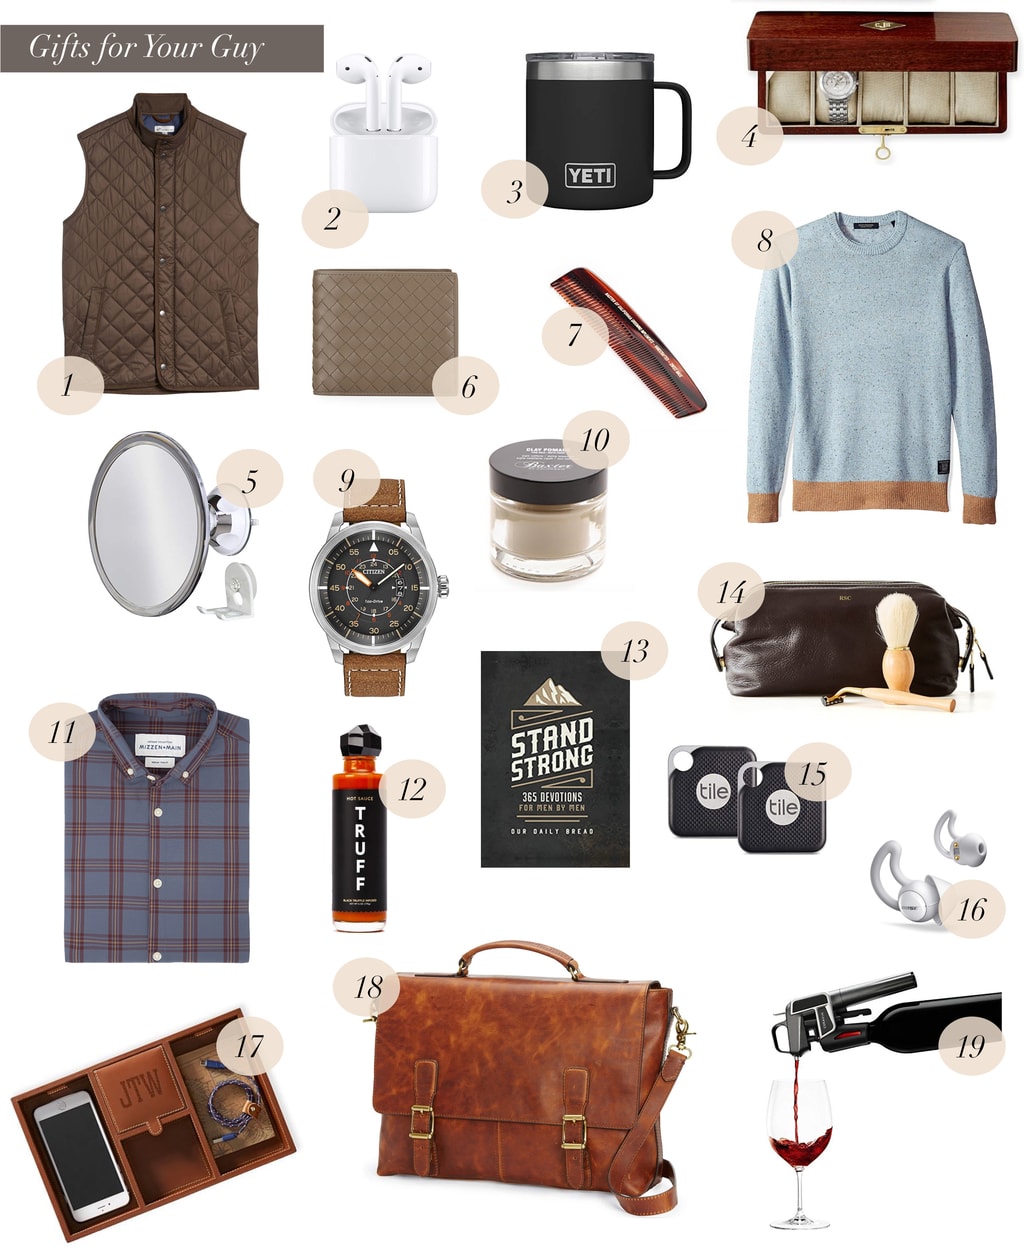 Gifts for Your Guy | Chronicles of Frivolity